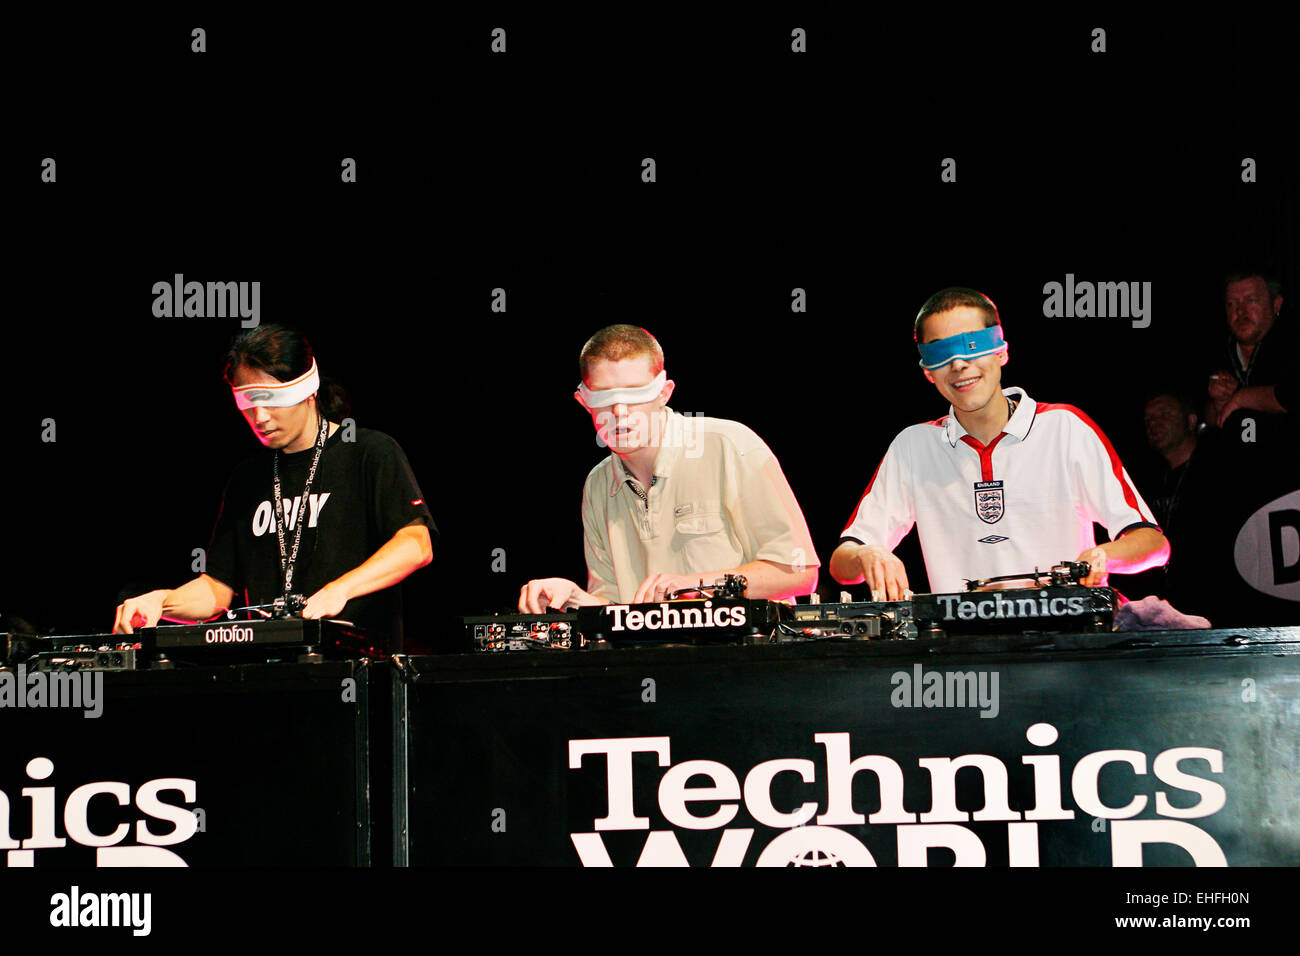 The Disablists from the UK DJing in the Team Championships at the DMC/Technics World DJ Championships at Hammersmith Apollo. Stock Photo